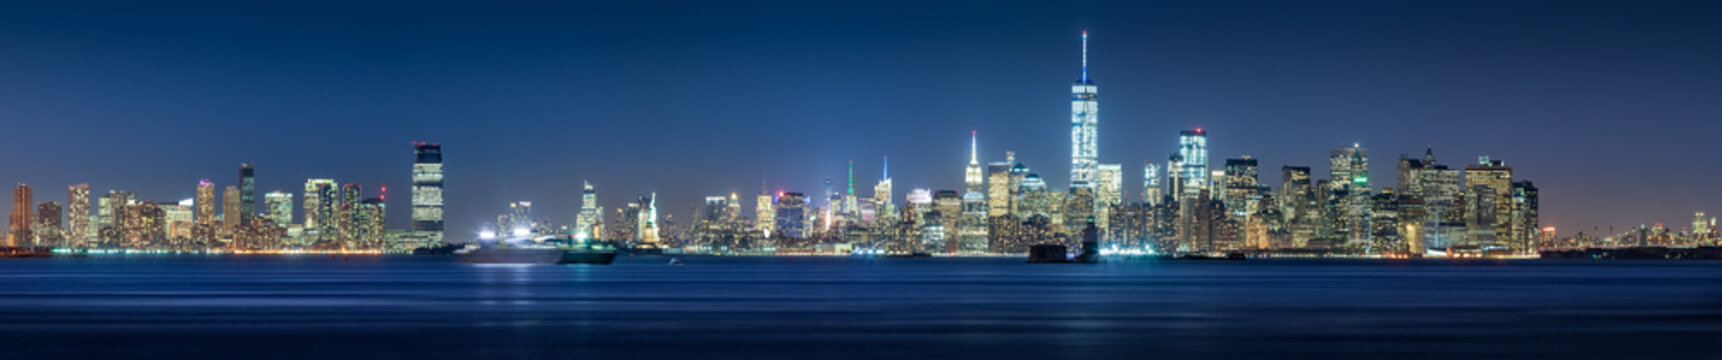 New York City Financial District skyscrapers and Hudson River at dusk. Panoramic view of Lower Manhattan © Francois Roux